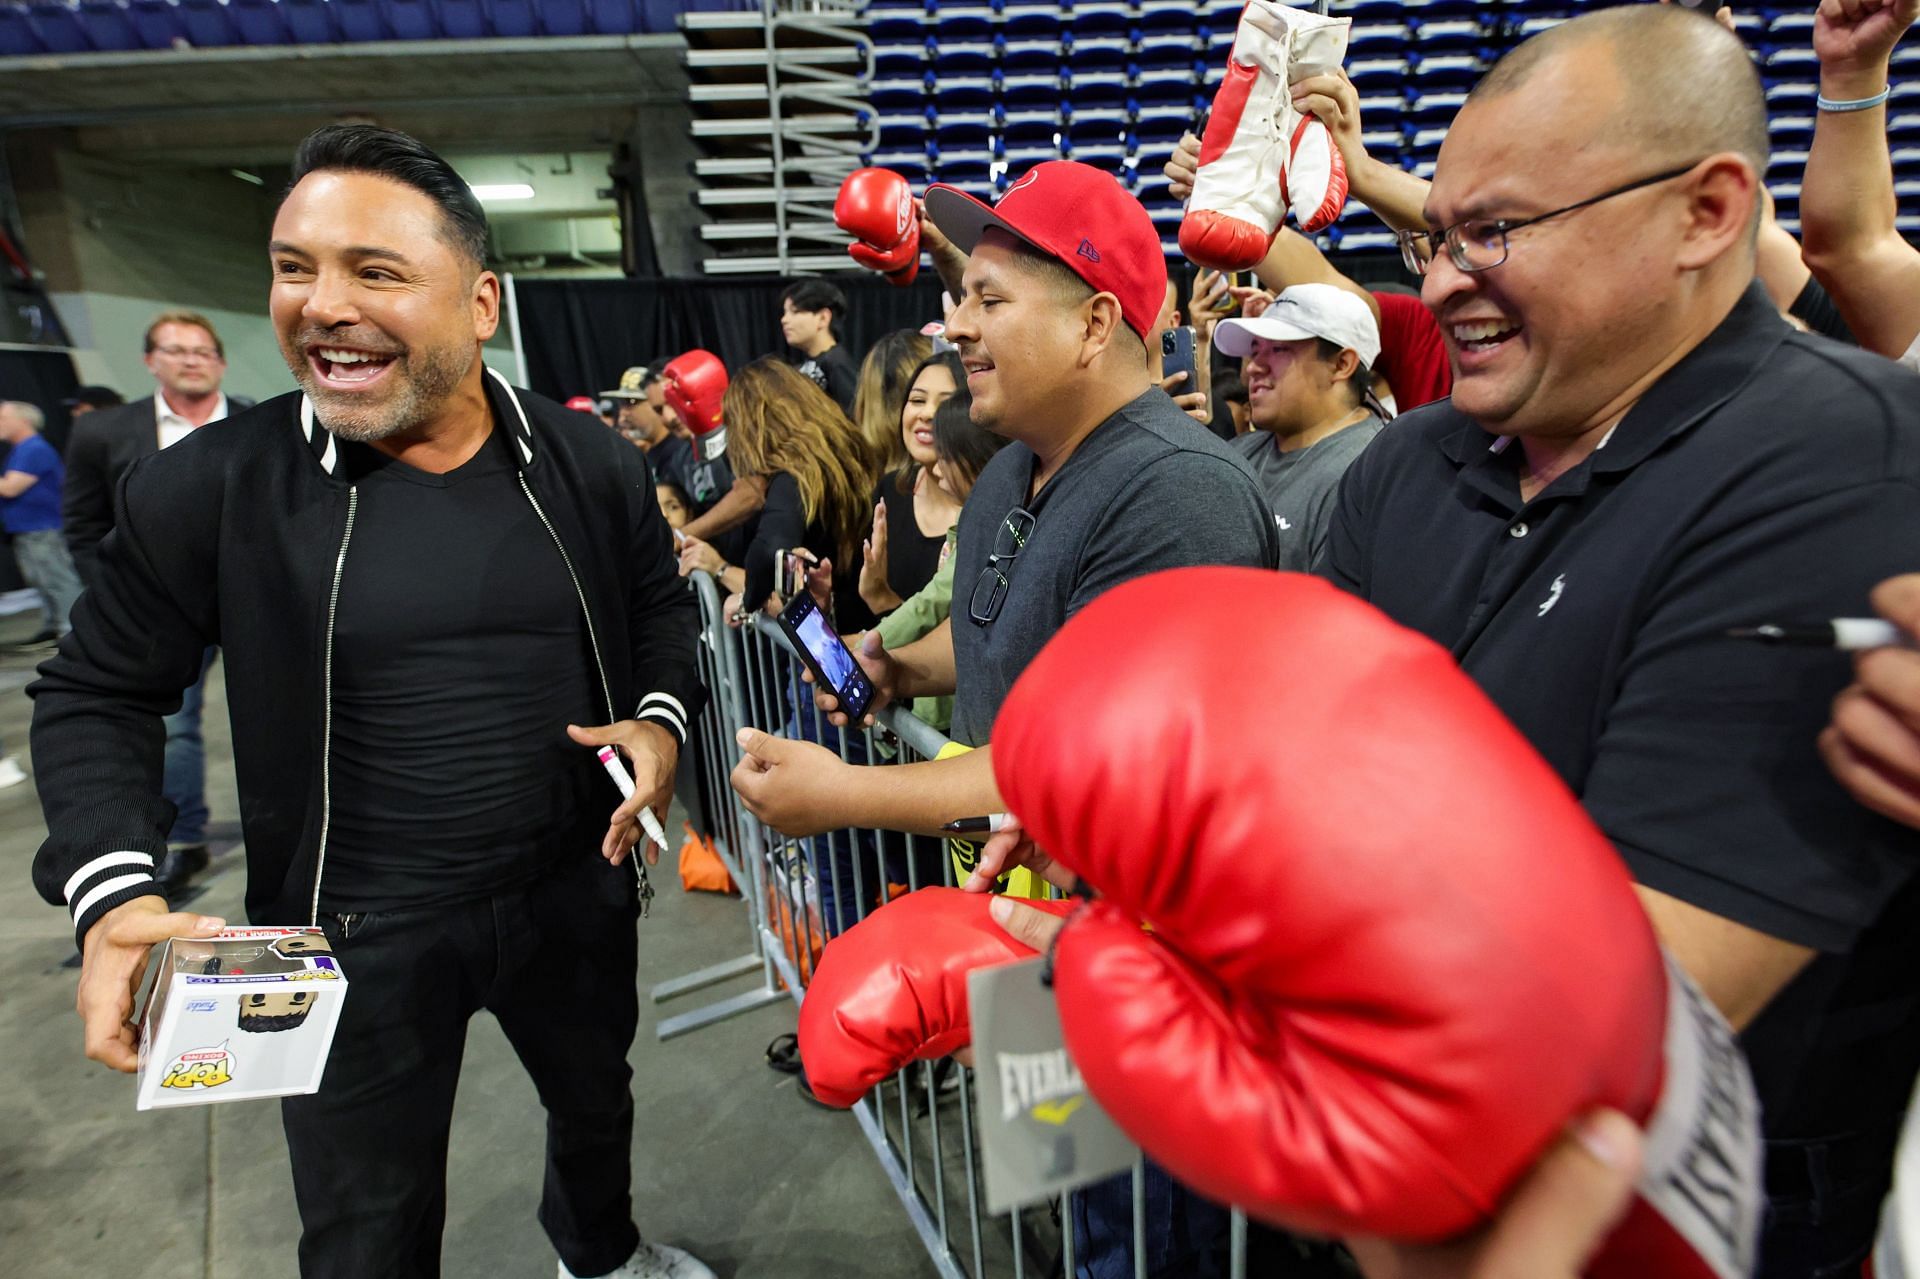 Oscar De La Hoya believes he will be the first Hispanic athlete to become a billionaire. (Photo by Carmen Mandato/Getty Images)